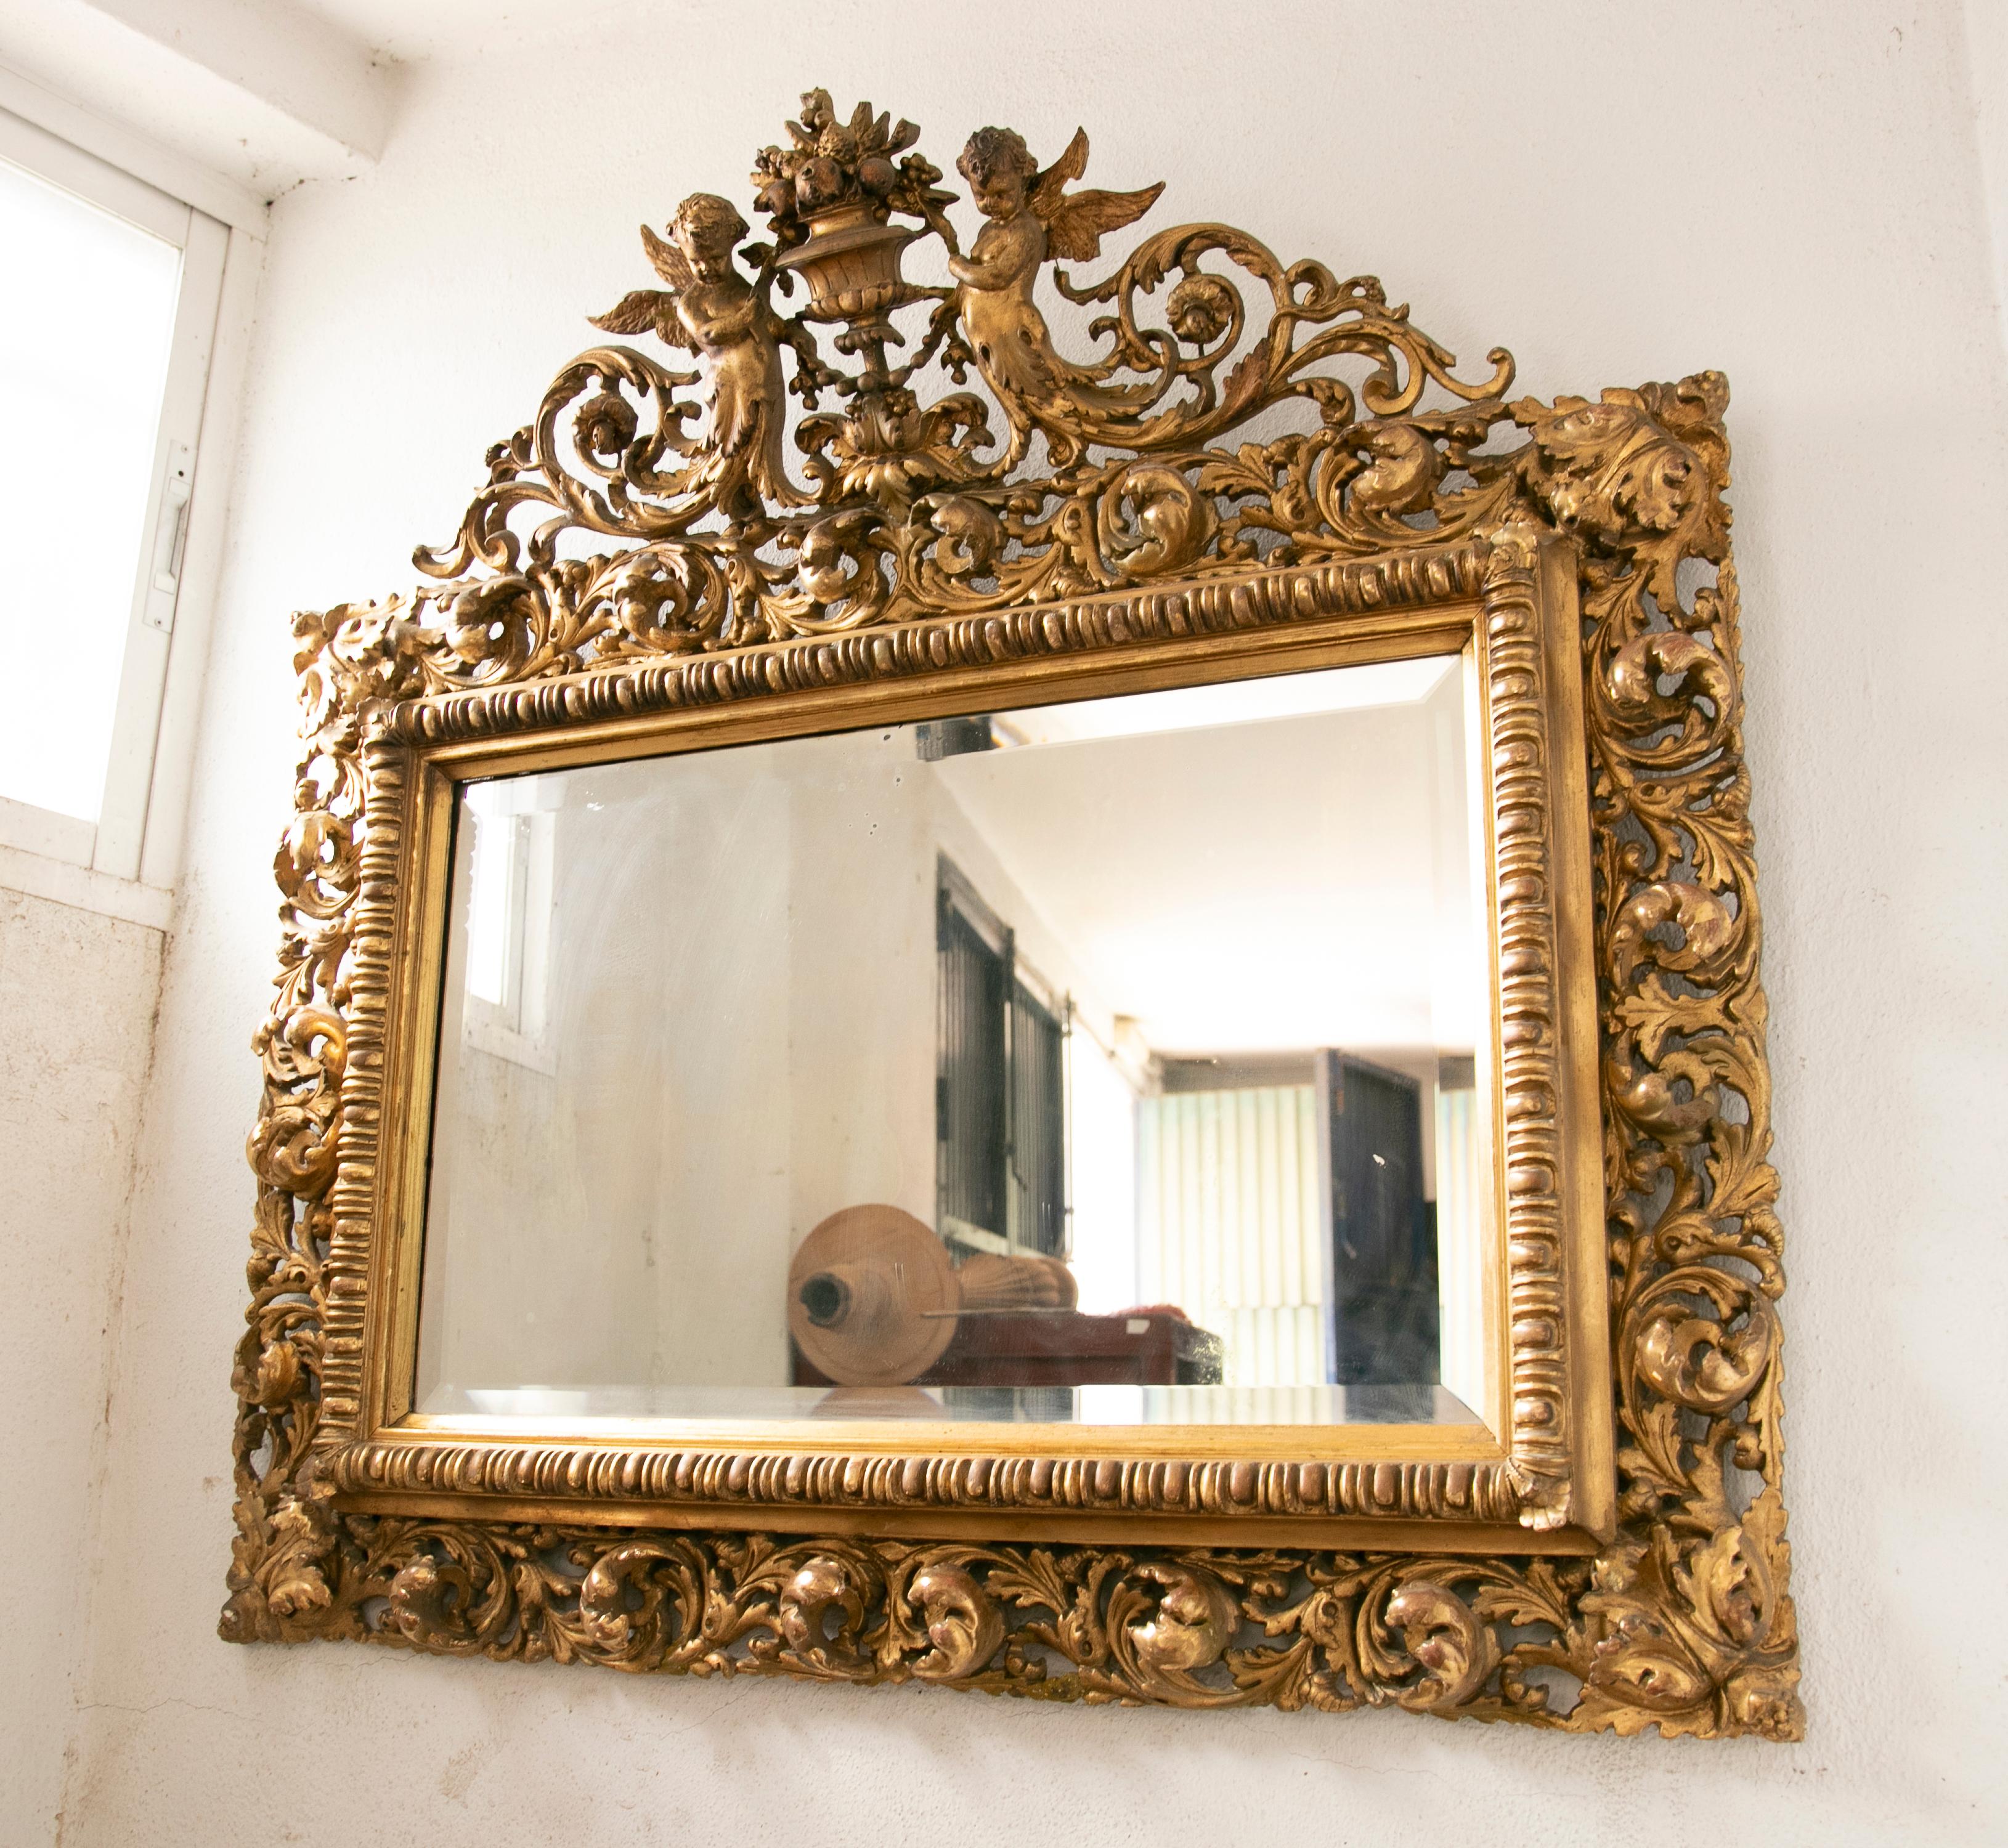 French wall mirror in gilded wood with flowers and cherubs decoration.